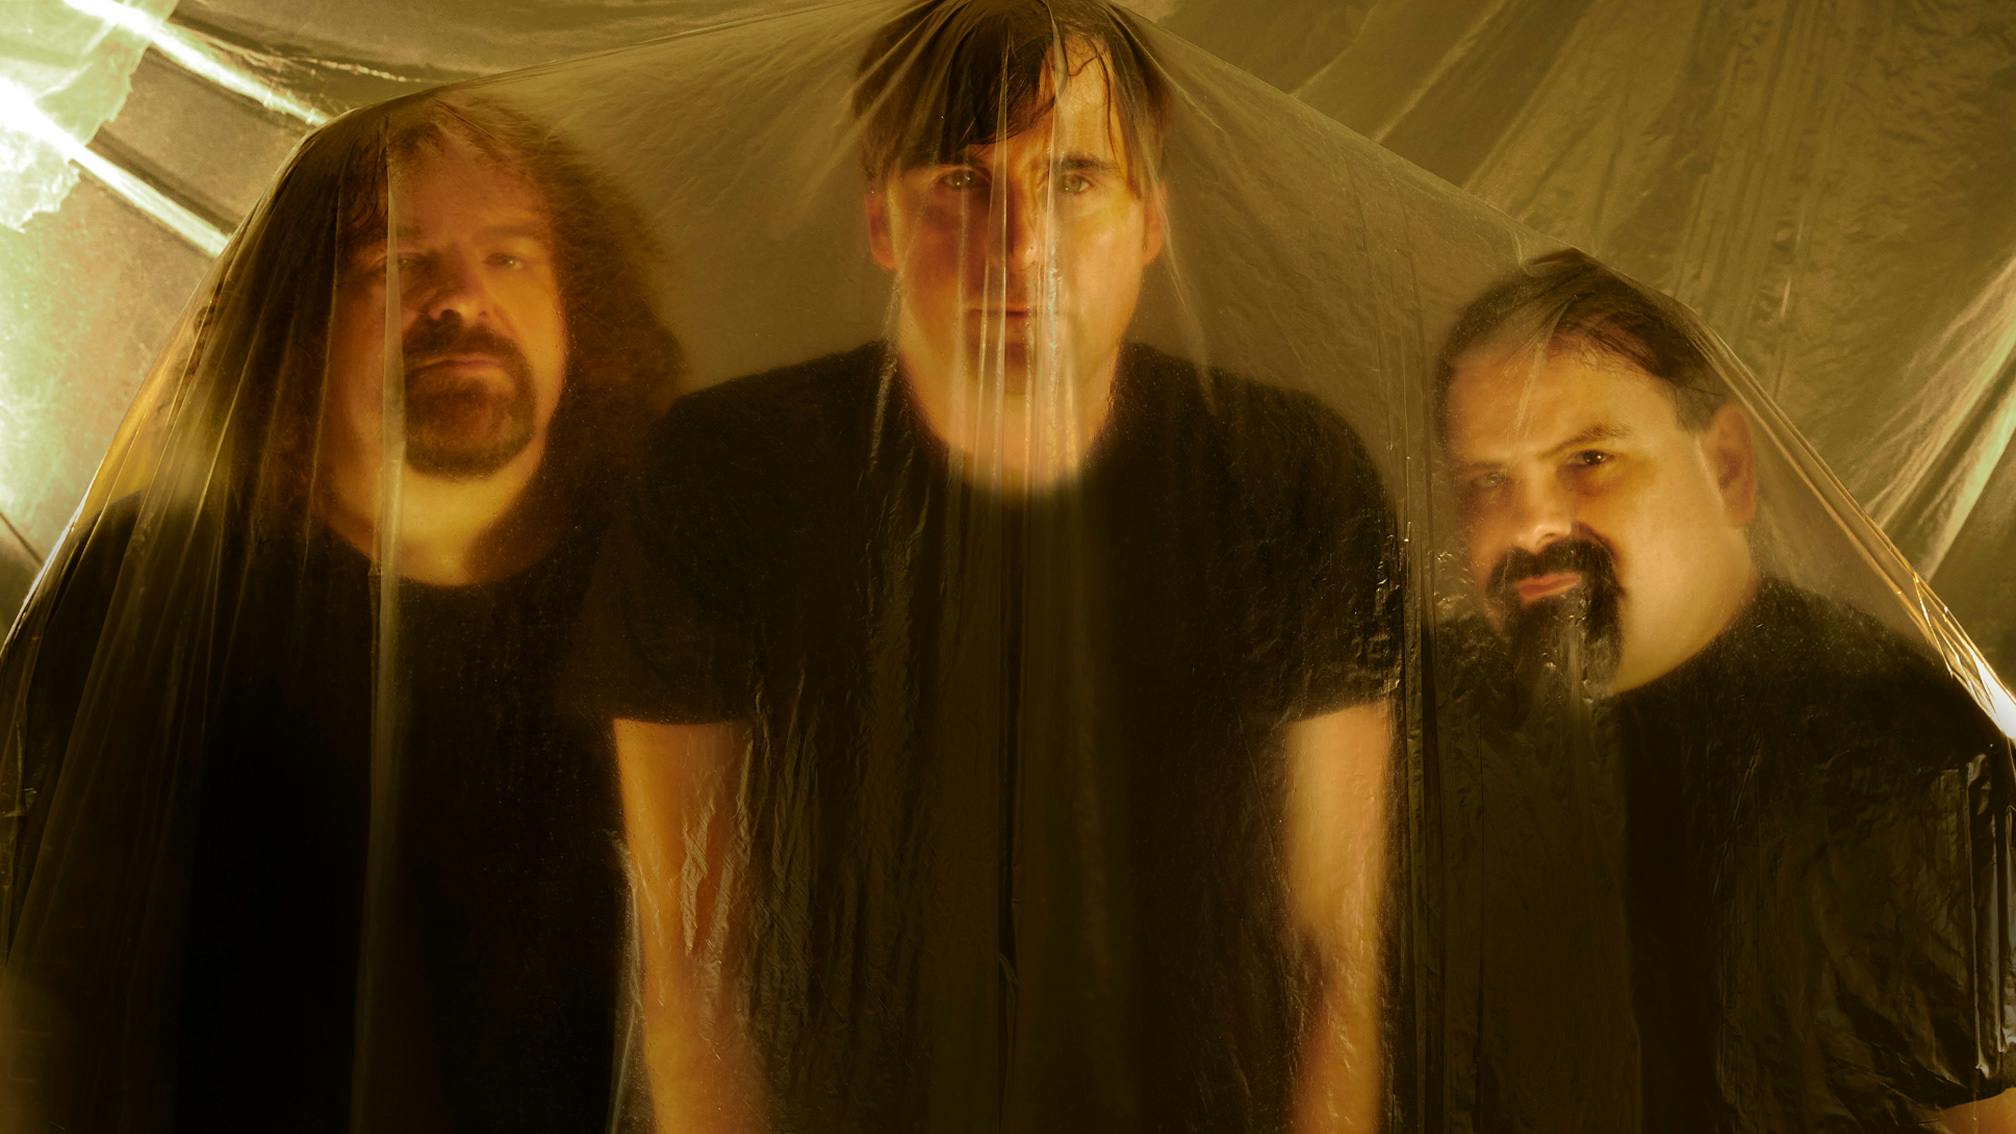 They'll Always Fight Fascists, But Napalm Death Is About More Than Politics